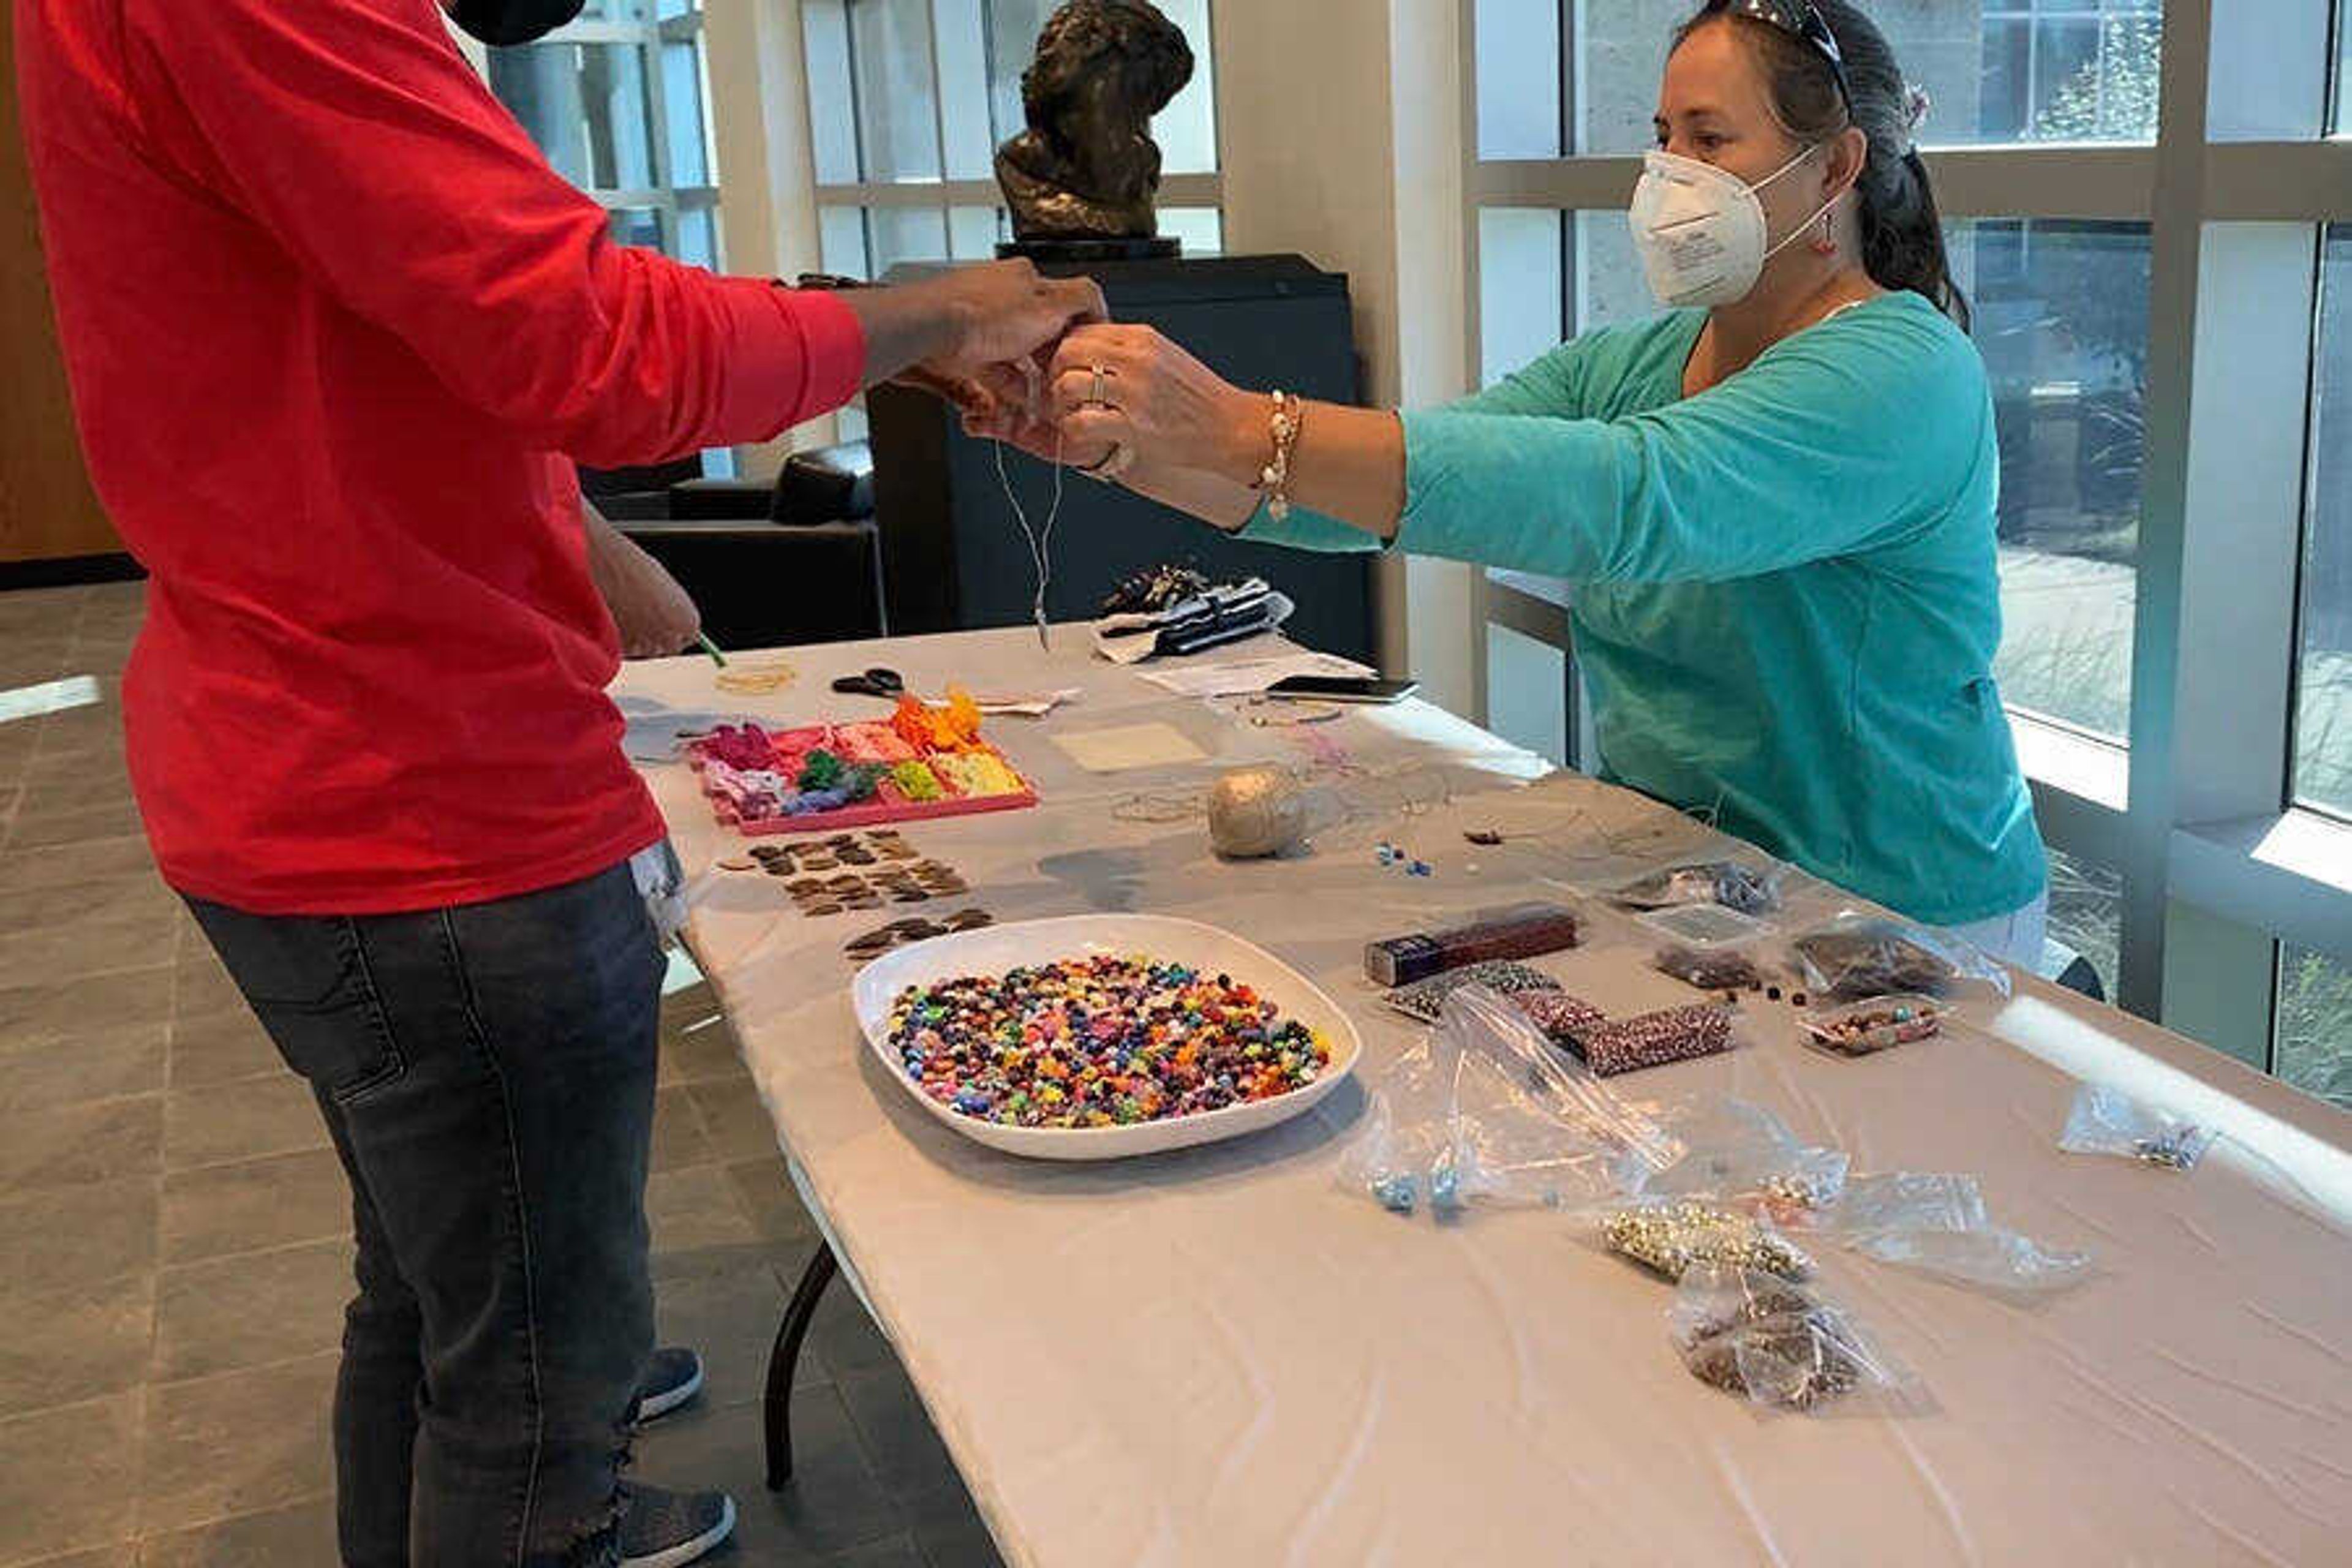 Museum Curator Ellen Flentge assisted freshman Tyrell Gilwater with his arrowhead necklace at the Make-and-Take event held on Sept. 4 at Crisp Museum.